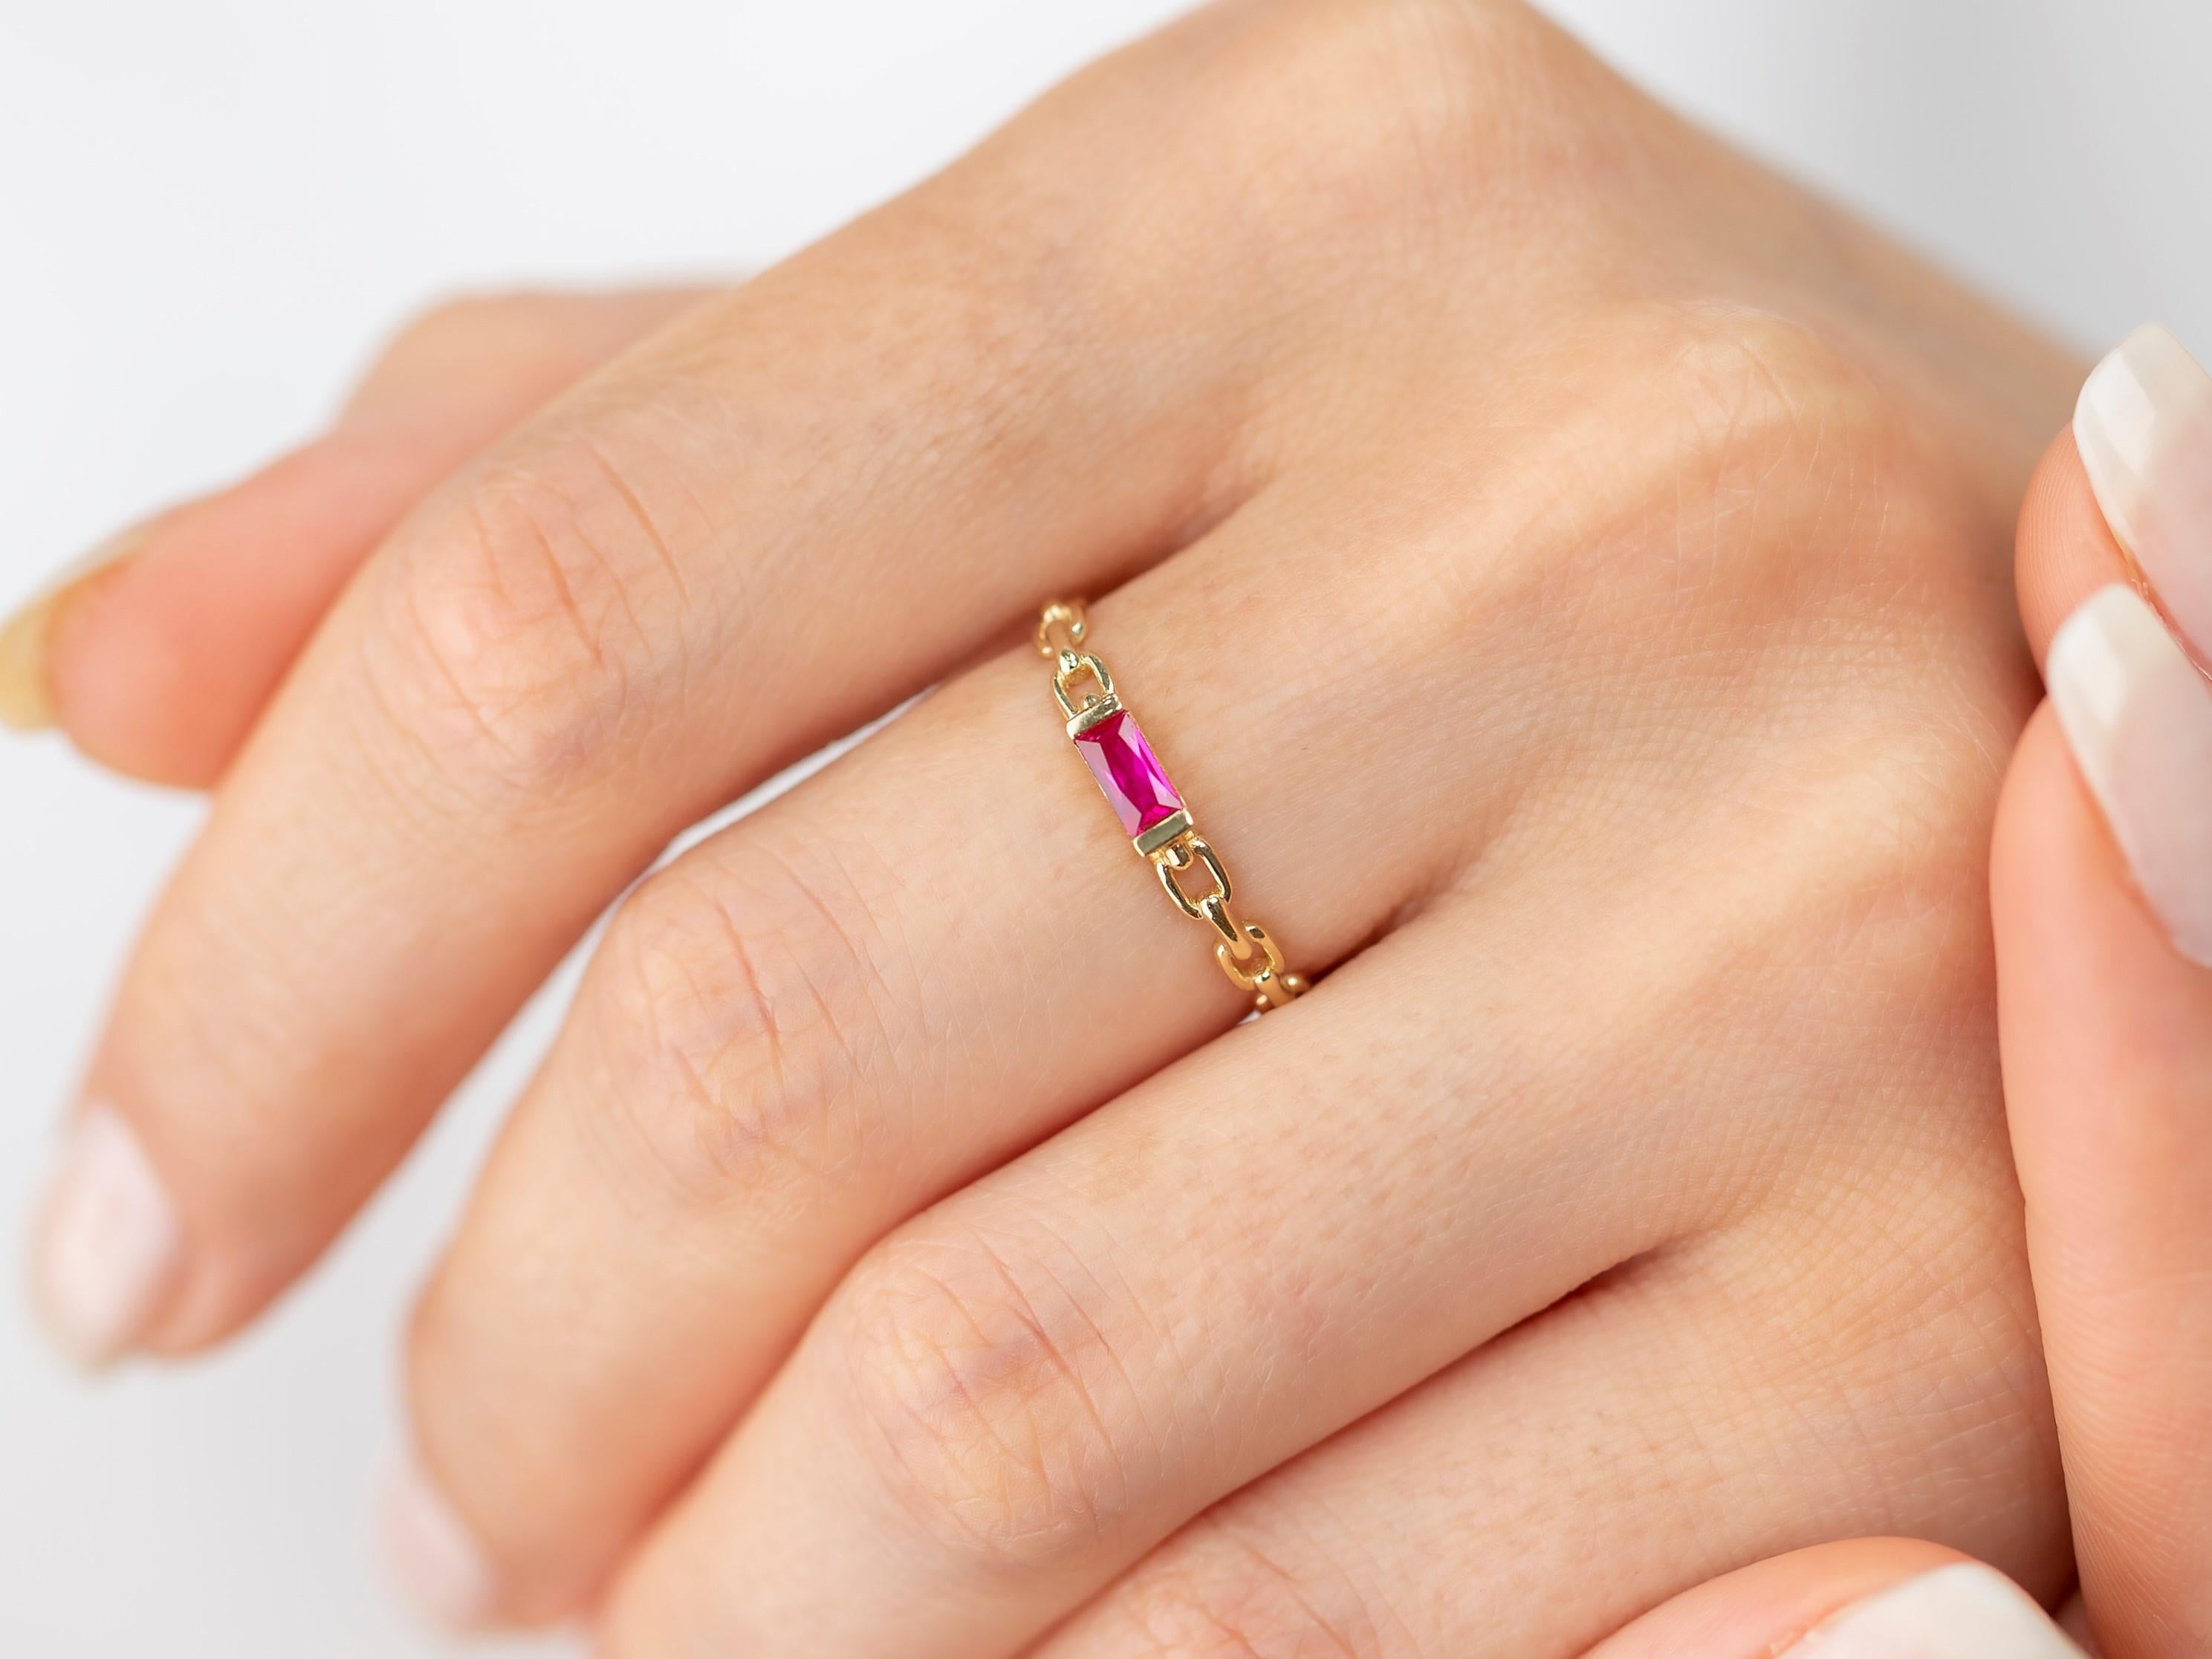 For Sale:  14 K Solid Gold Chain Link Ring -with Pink Quartz, Modern Minimal Ring 12